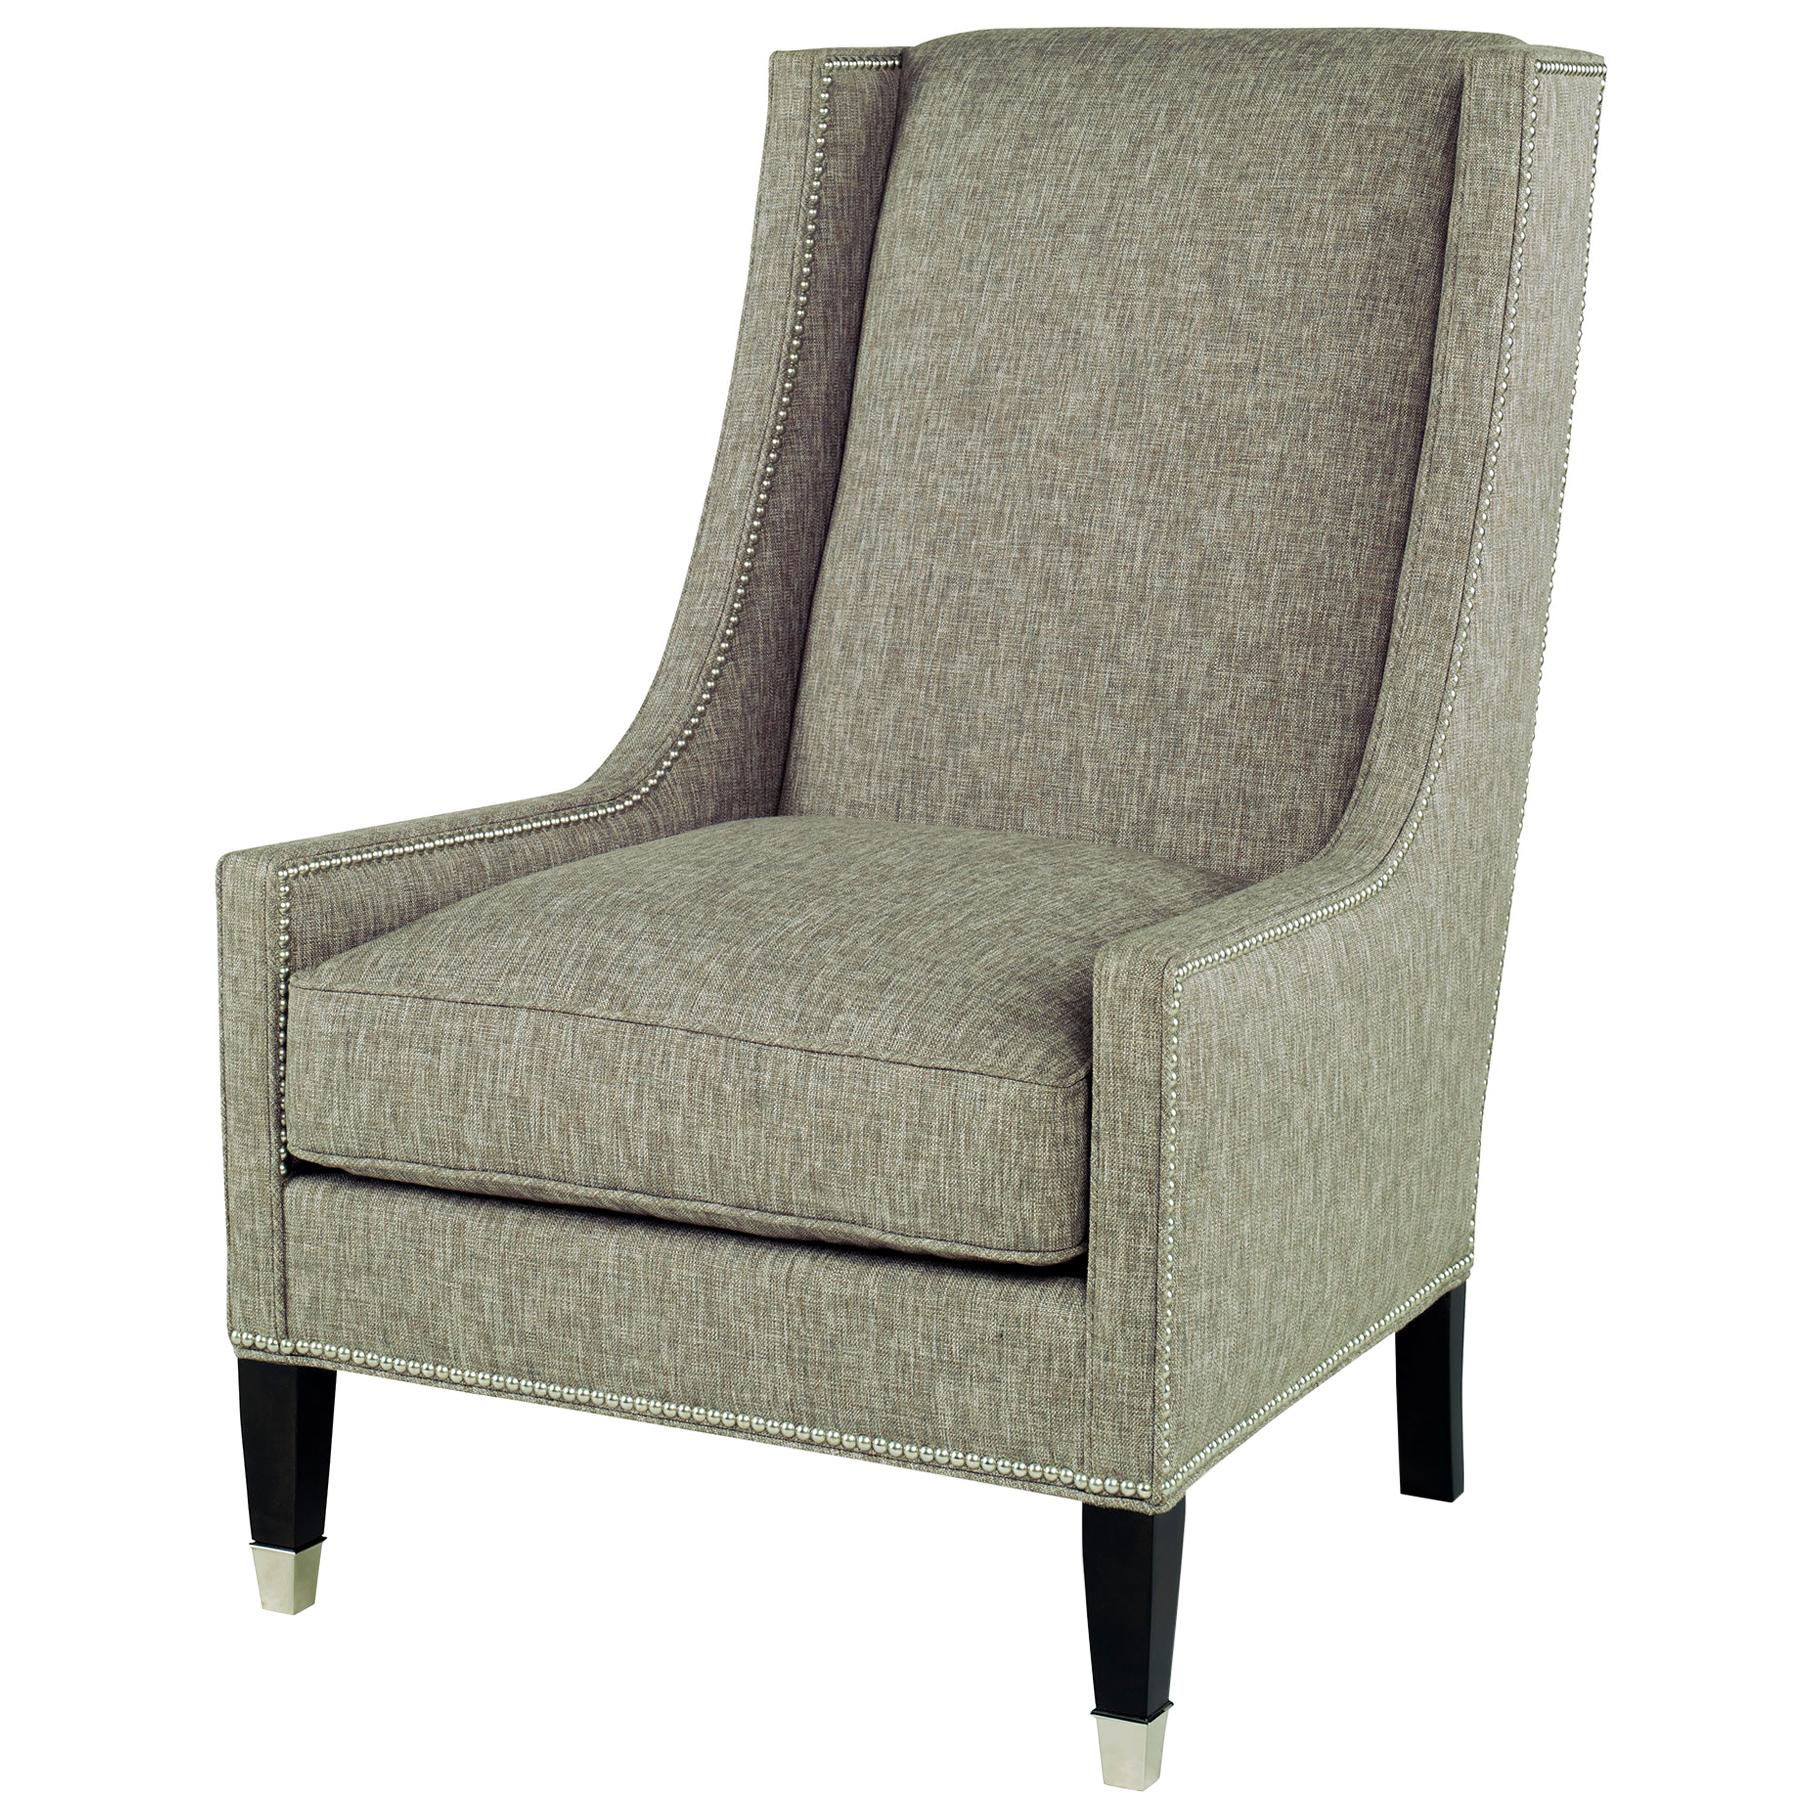 Tall Navarre Chair in Gray by CuratedKravet